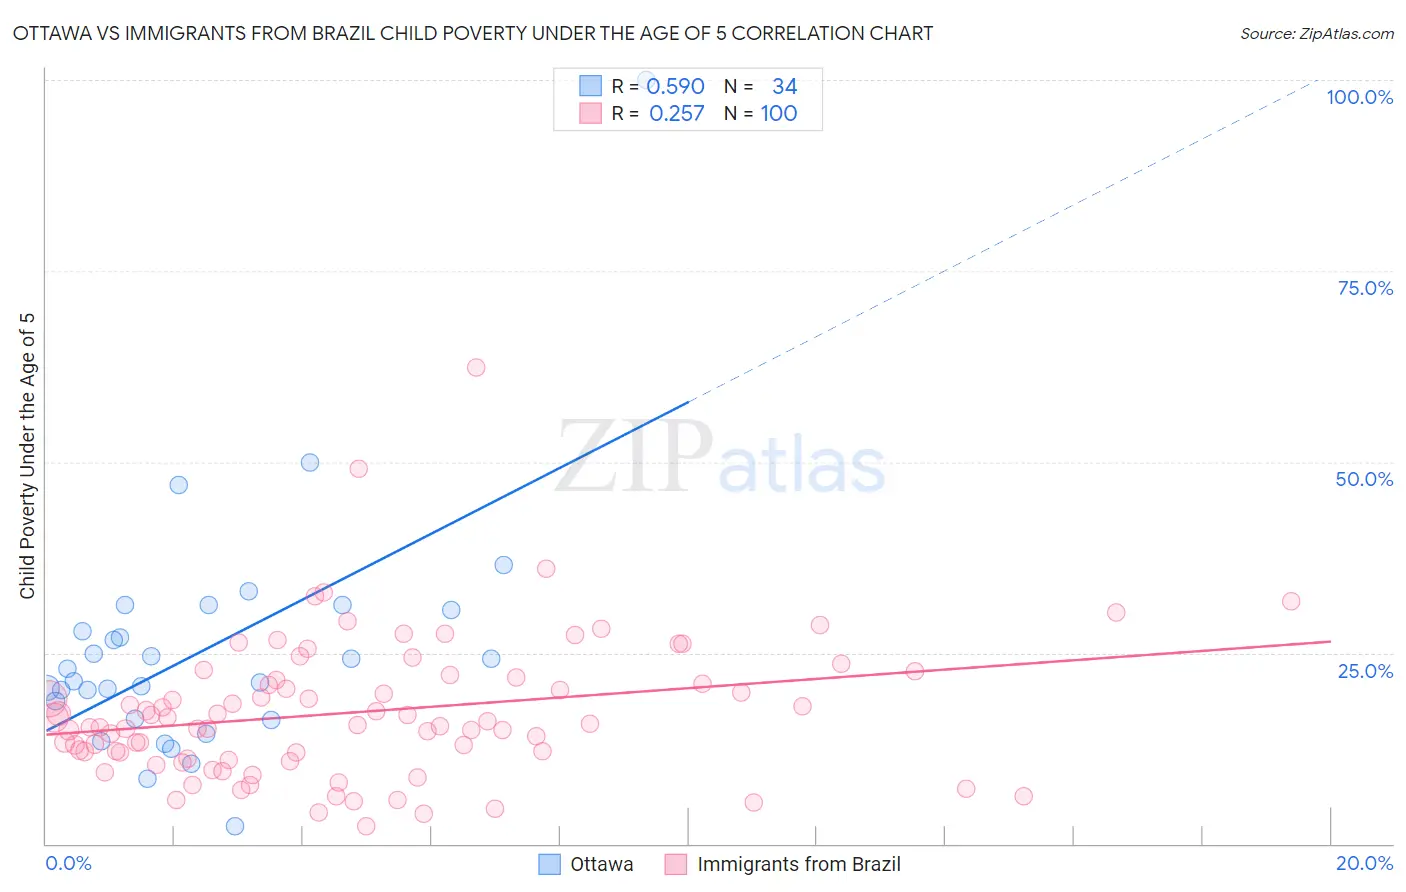 Ottawa vs Immigrants from Brazil Child Poverty Under the Age of 5